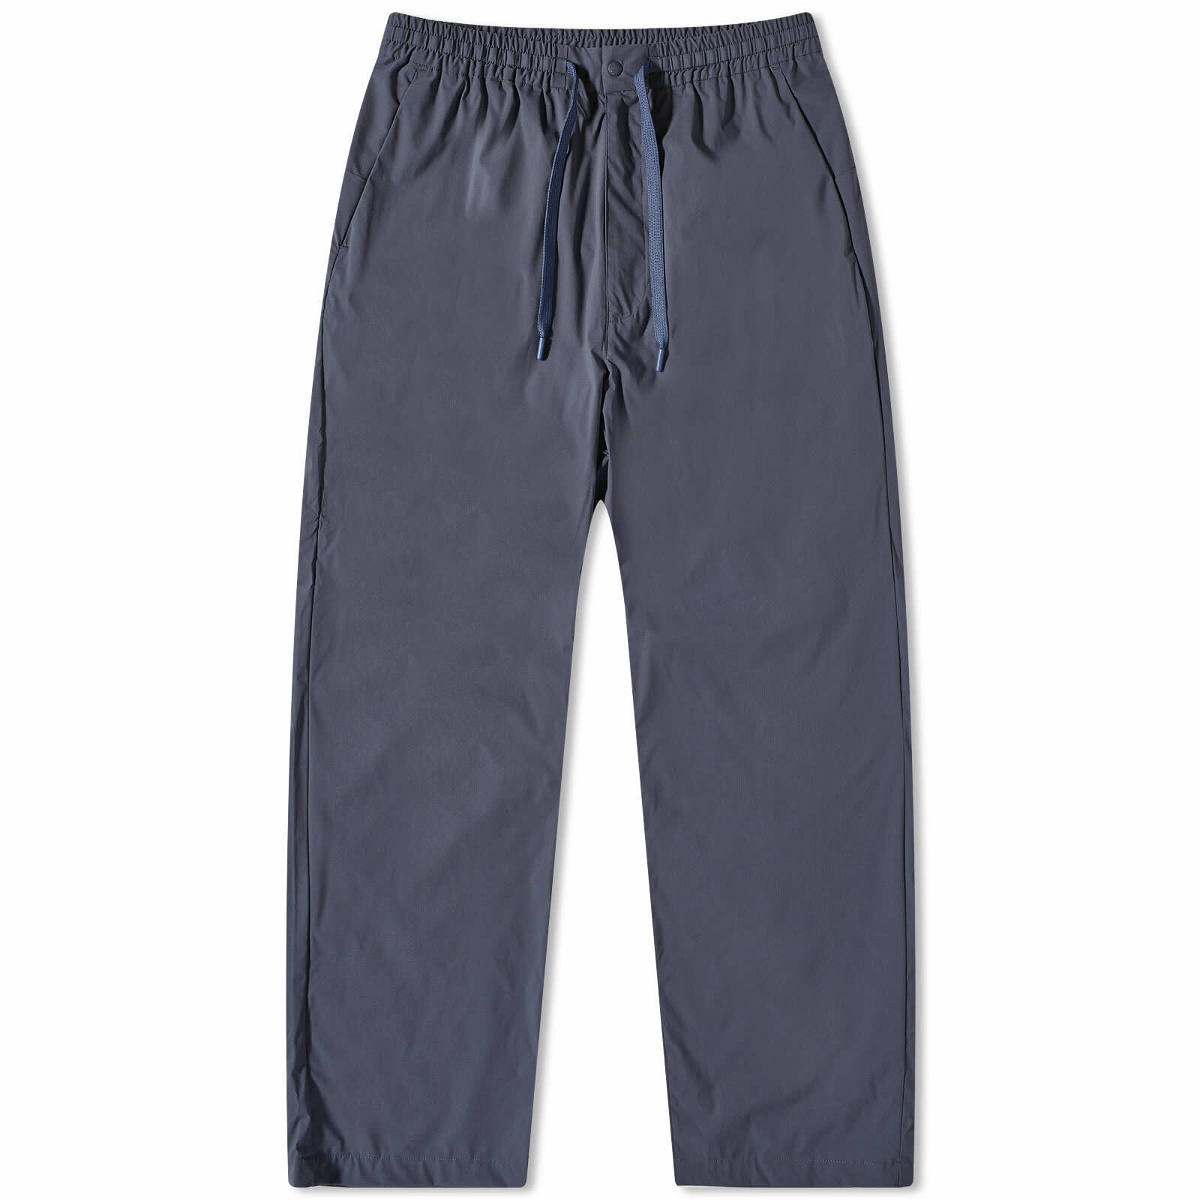 Rapha x Snow Peak DWR Light Trousers in India Ink Rapha